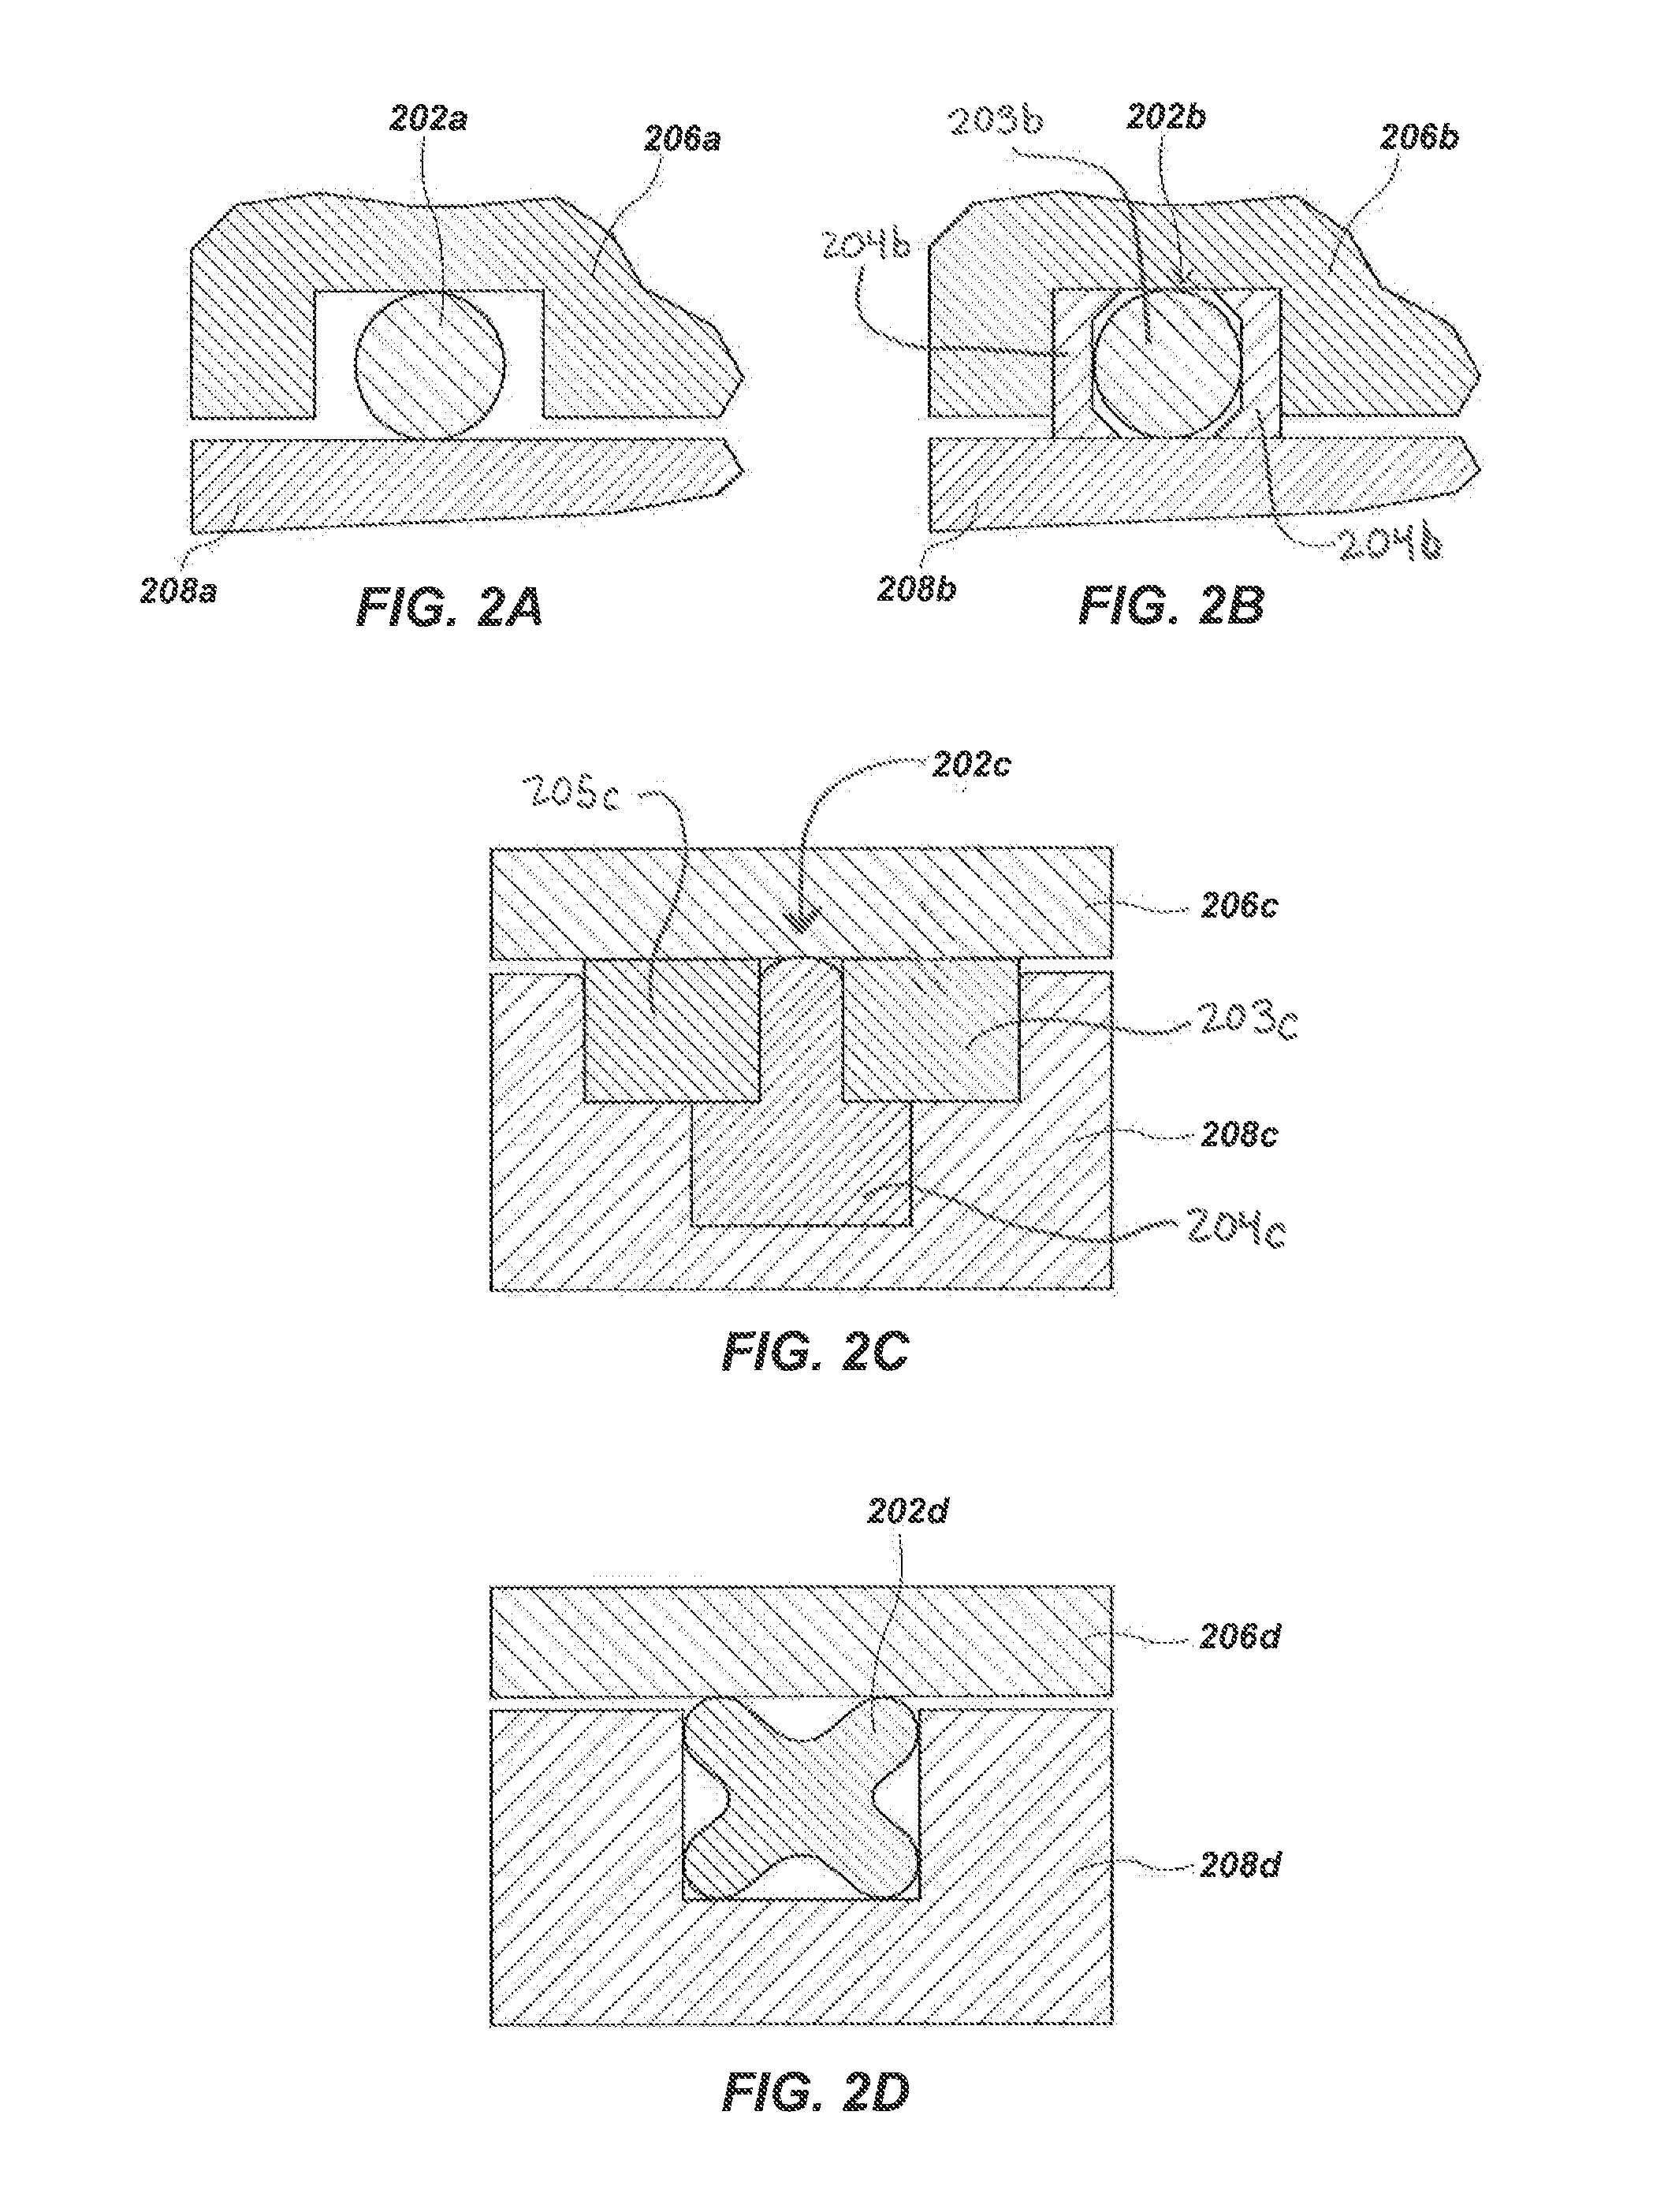 Superelastic nickel-titanium alloy downhole seals, wellbore tools including such seals, and related methods